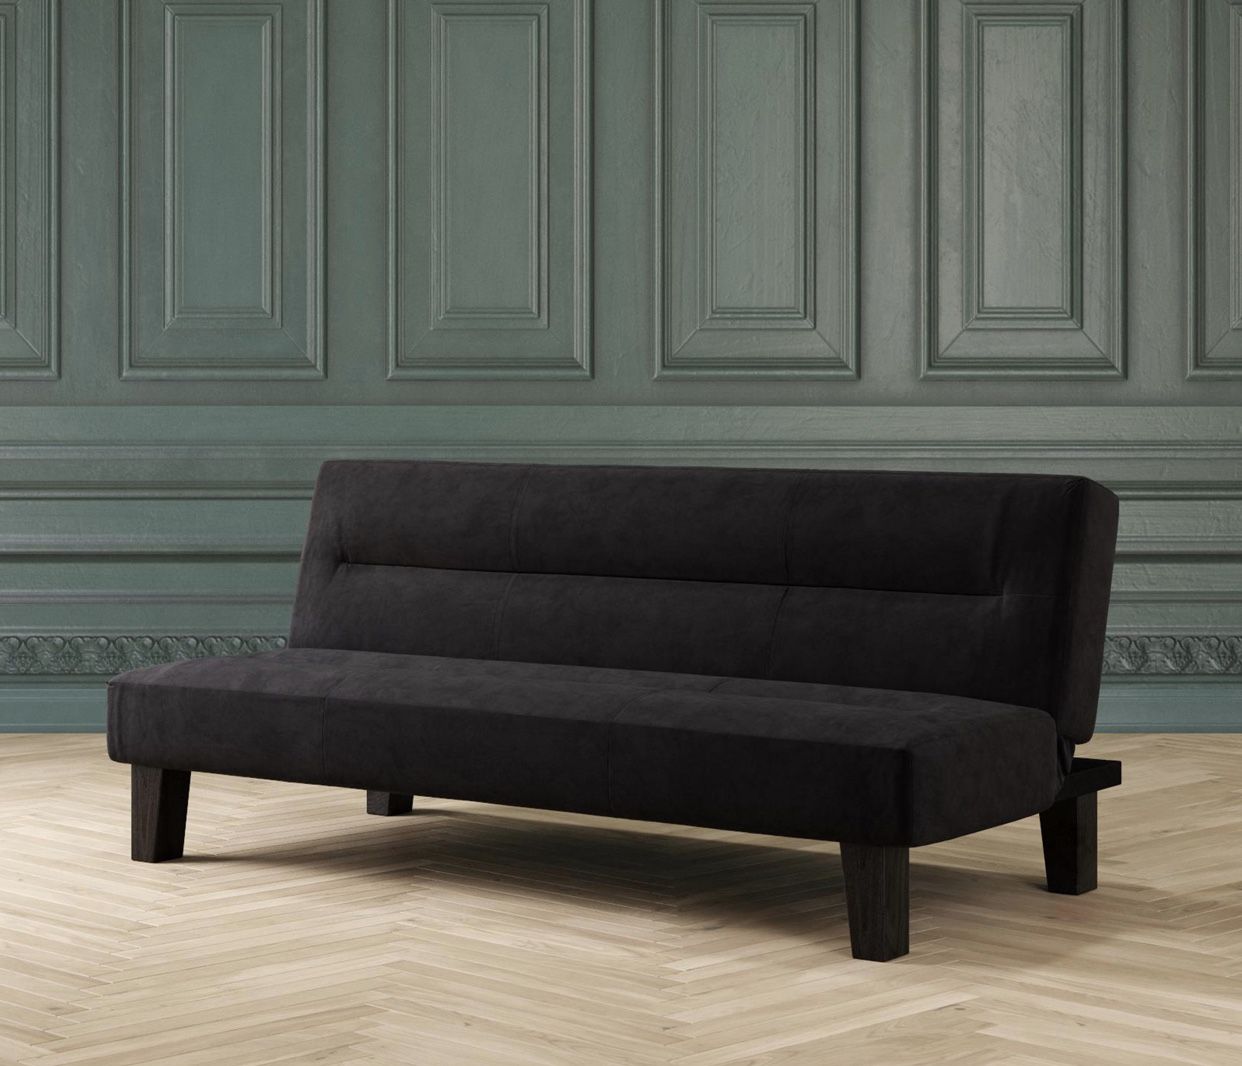 New in Box Futon Couch with Microfiber Cover, Black. $100